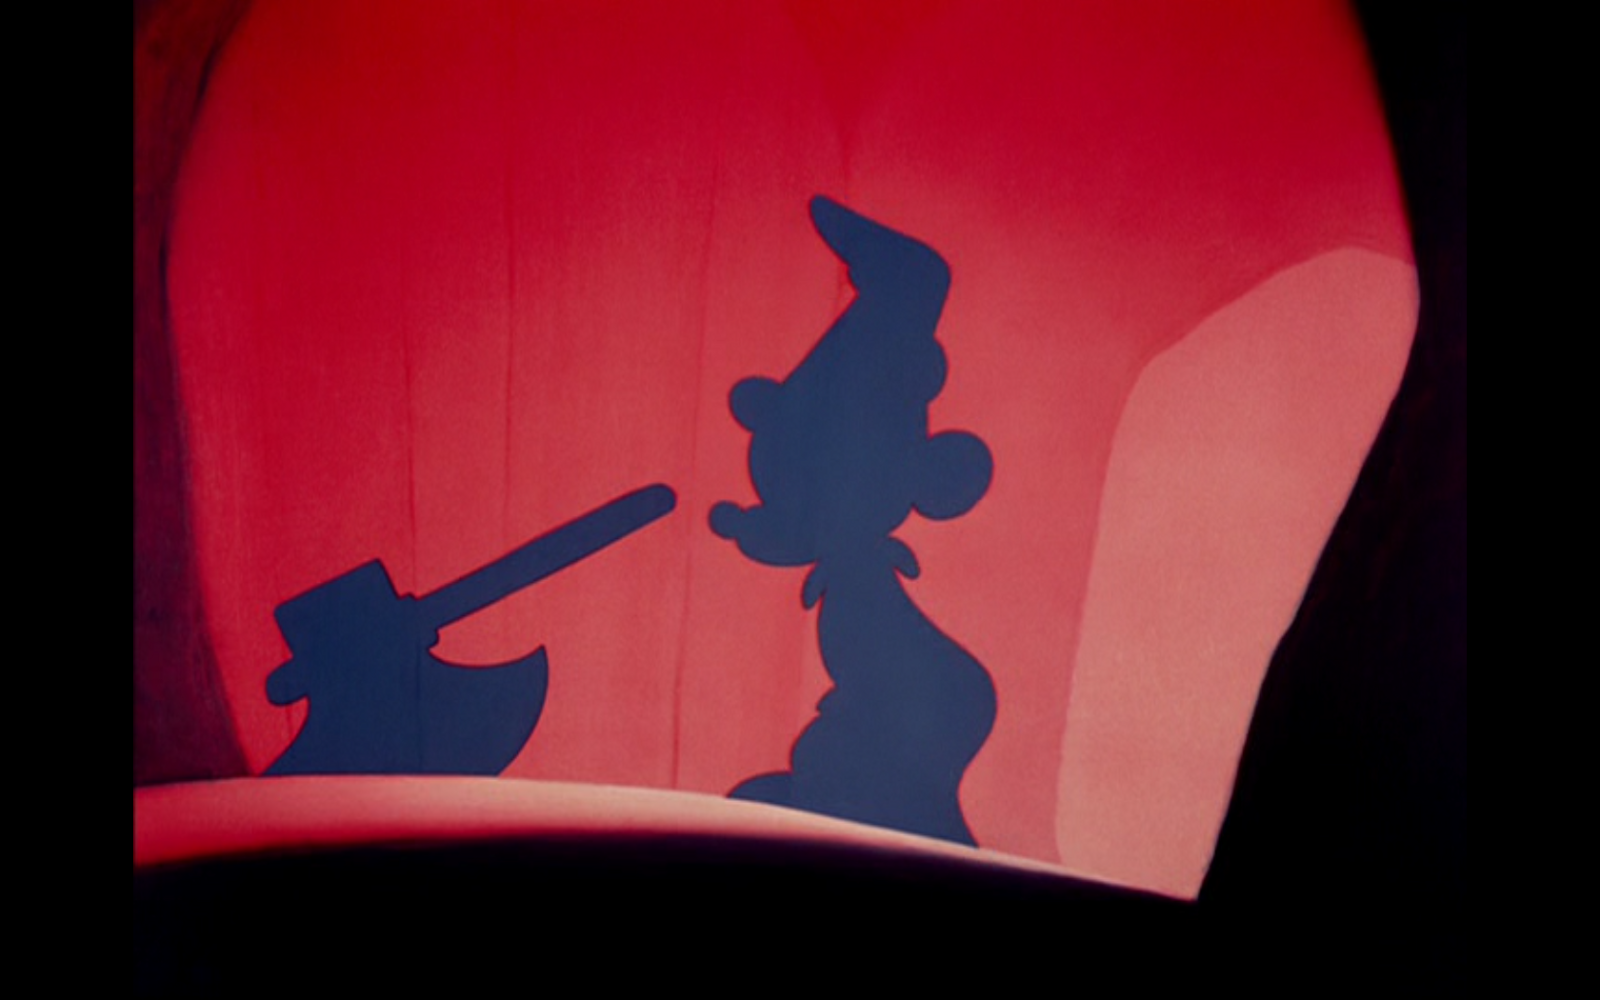 Using light, shadow, and color, Disney animators showed Mickey Mouse killing his own creation with an axe in "The Sorcerer's Apprentice" (Disney)